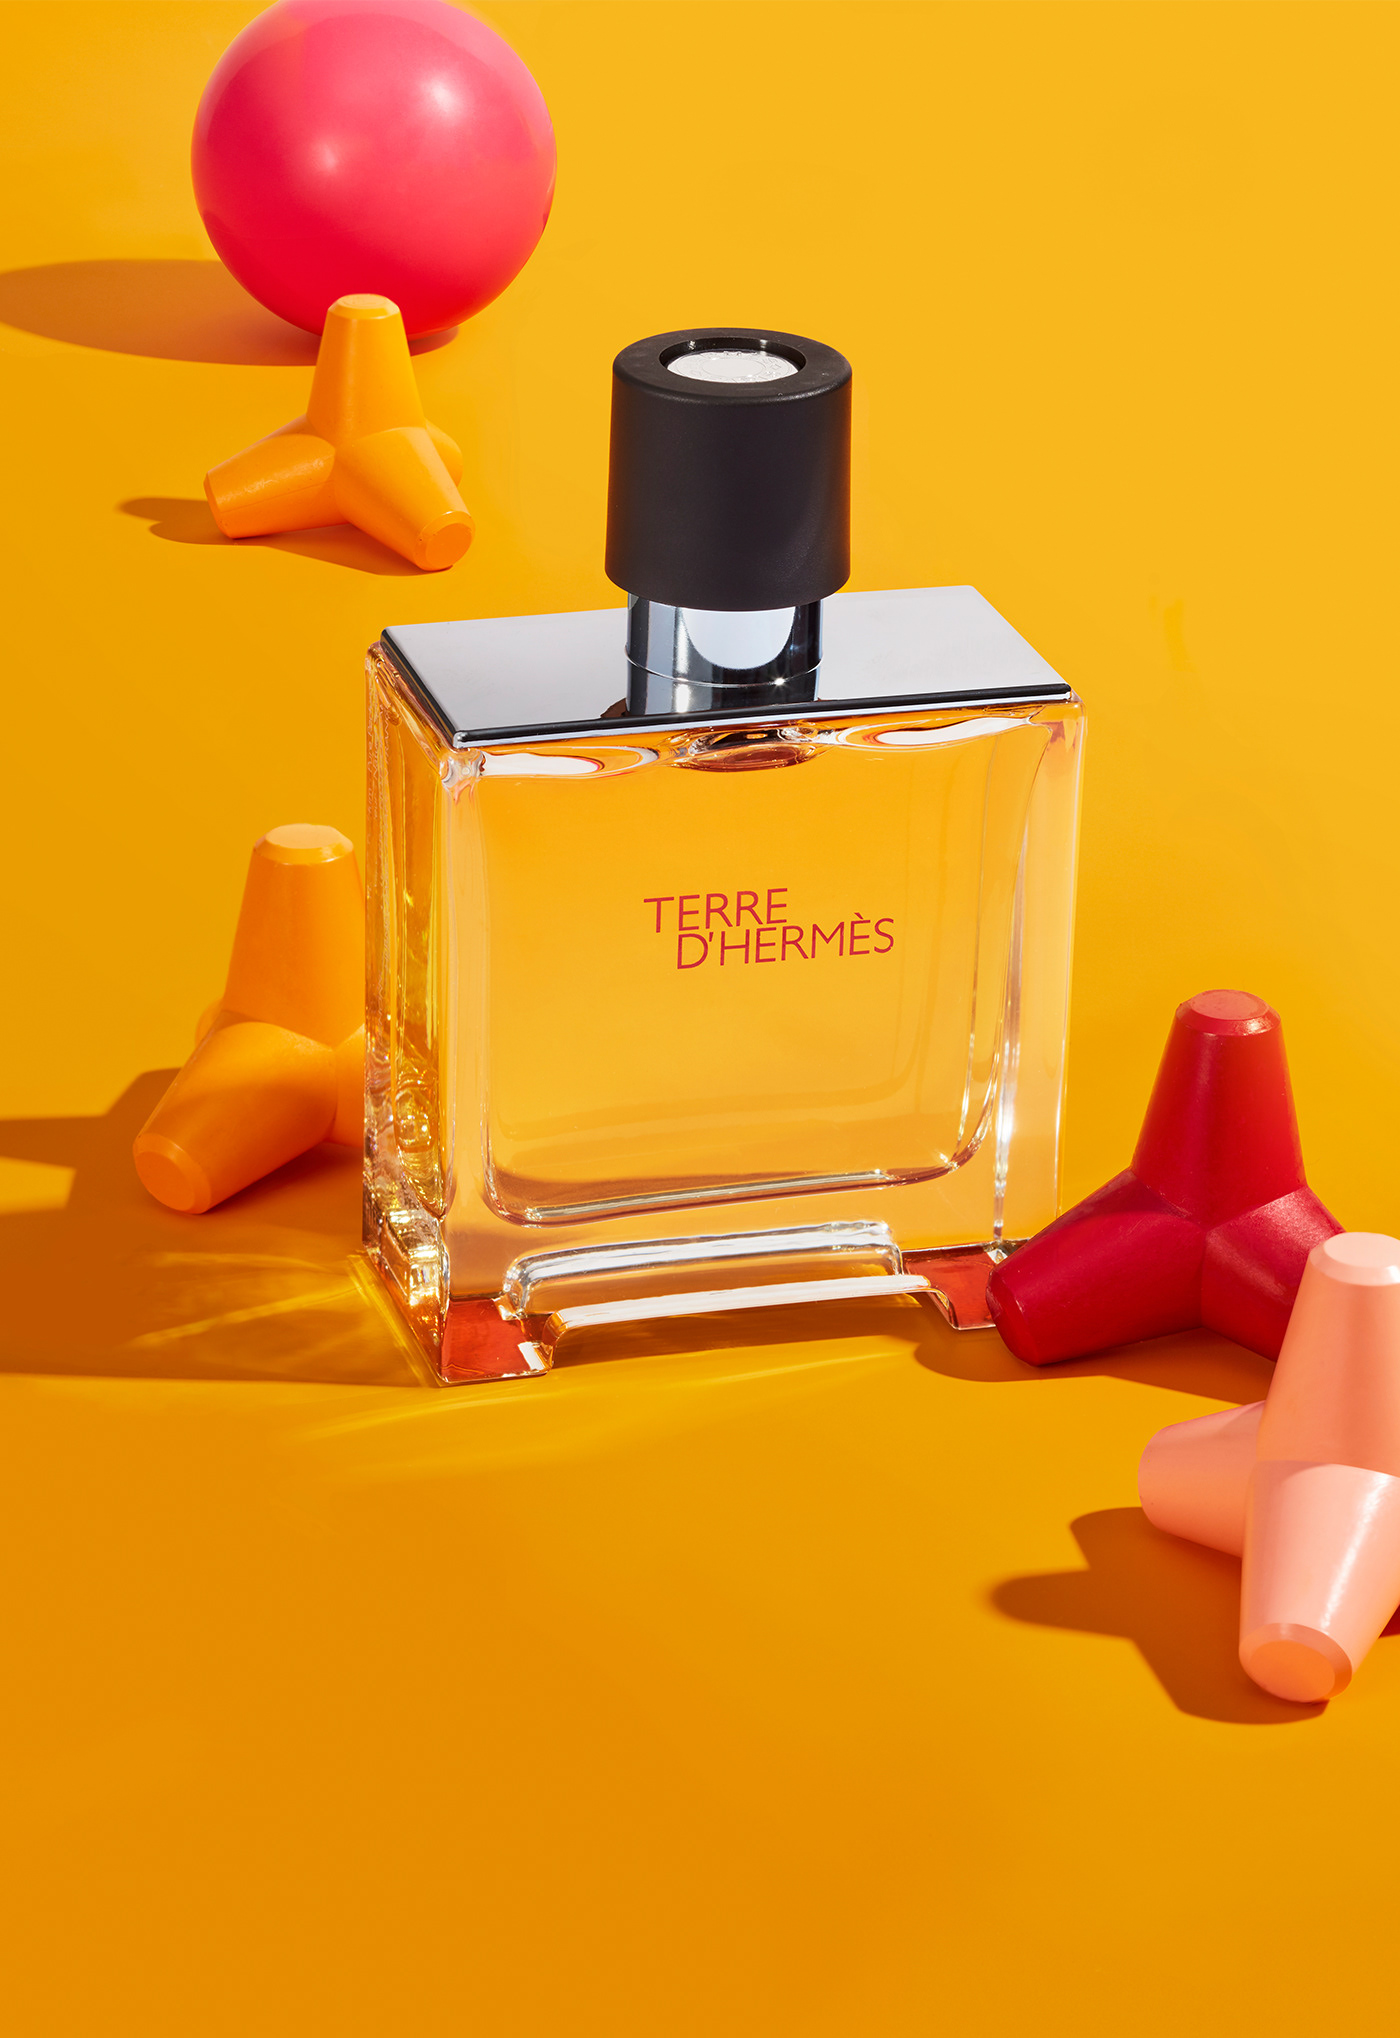 luxury beauty cosmetics Fragrance summer Bloomingdales sports makeup lipstick editorial